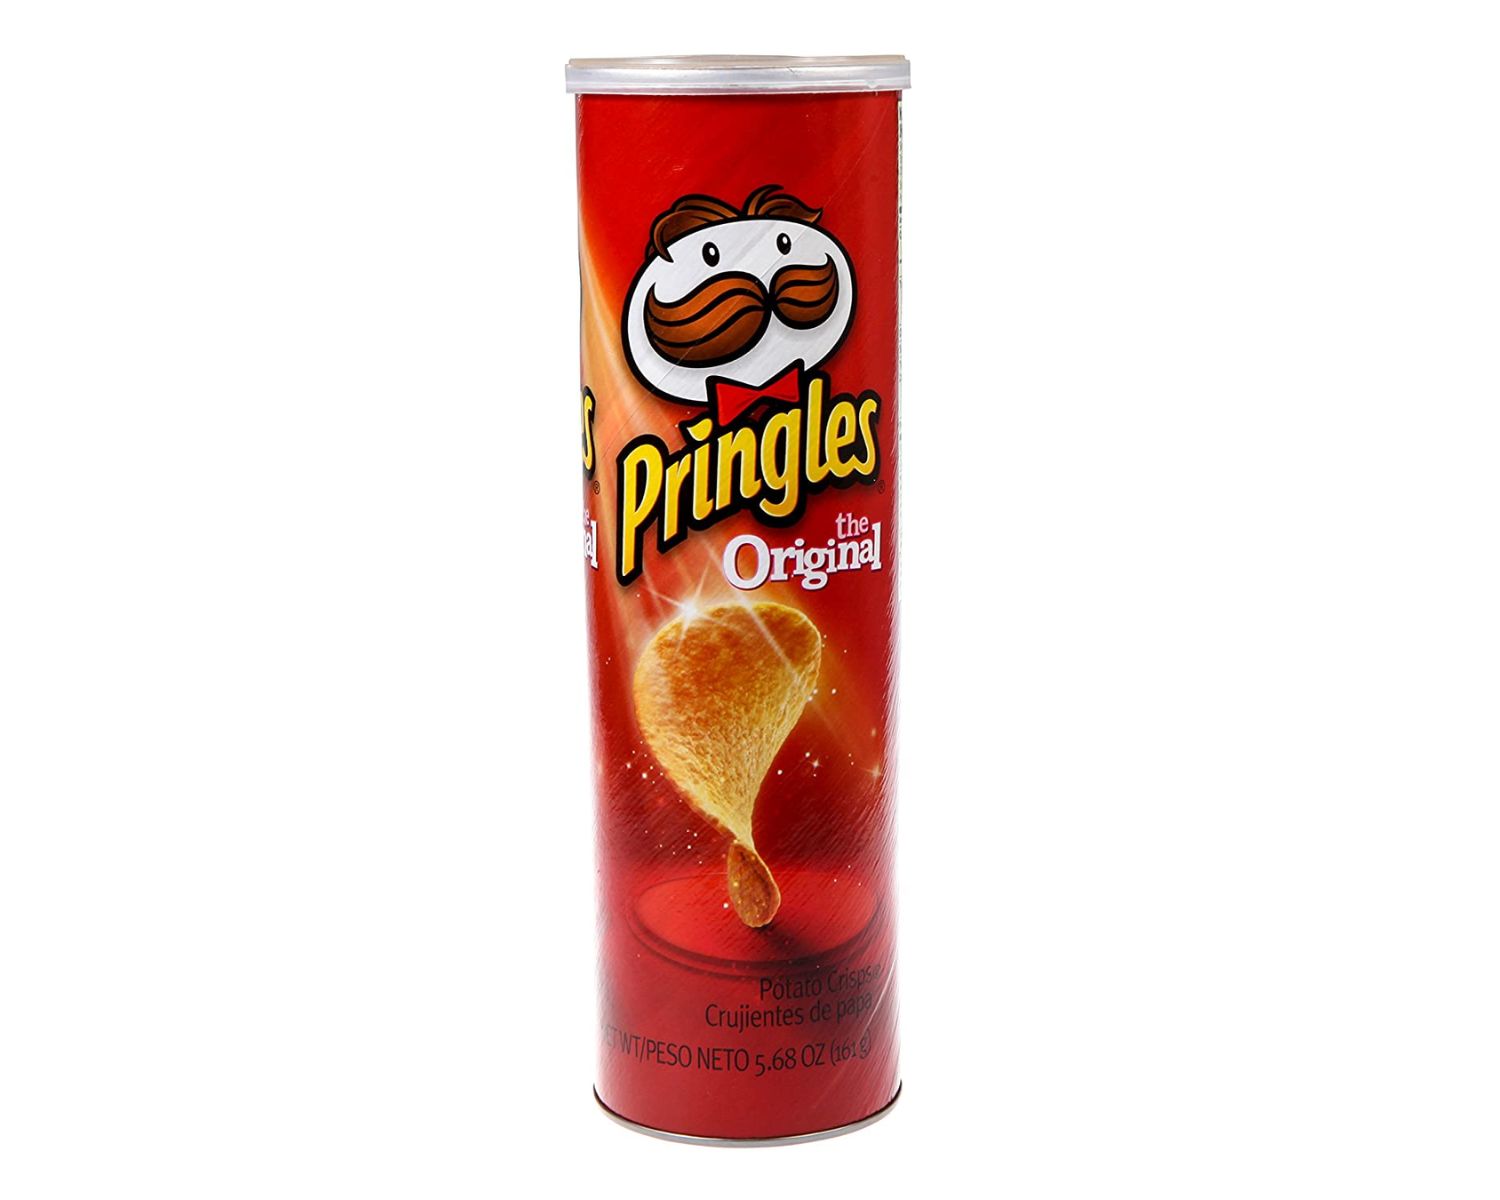 15 Pringles Original Nutrition Facts - Facts.net